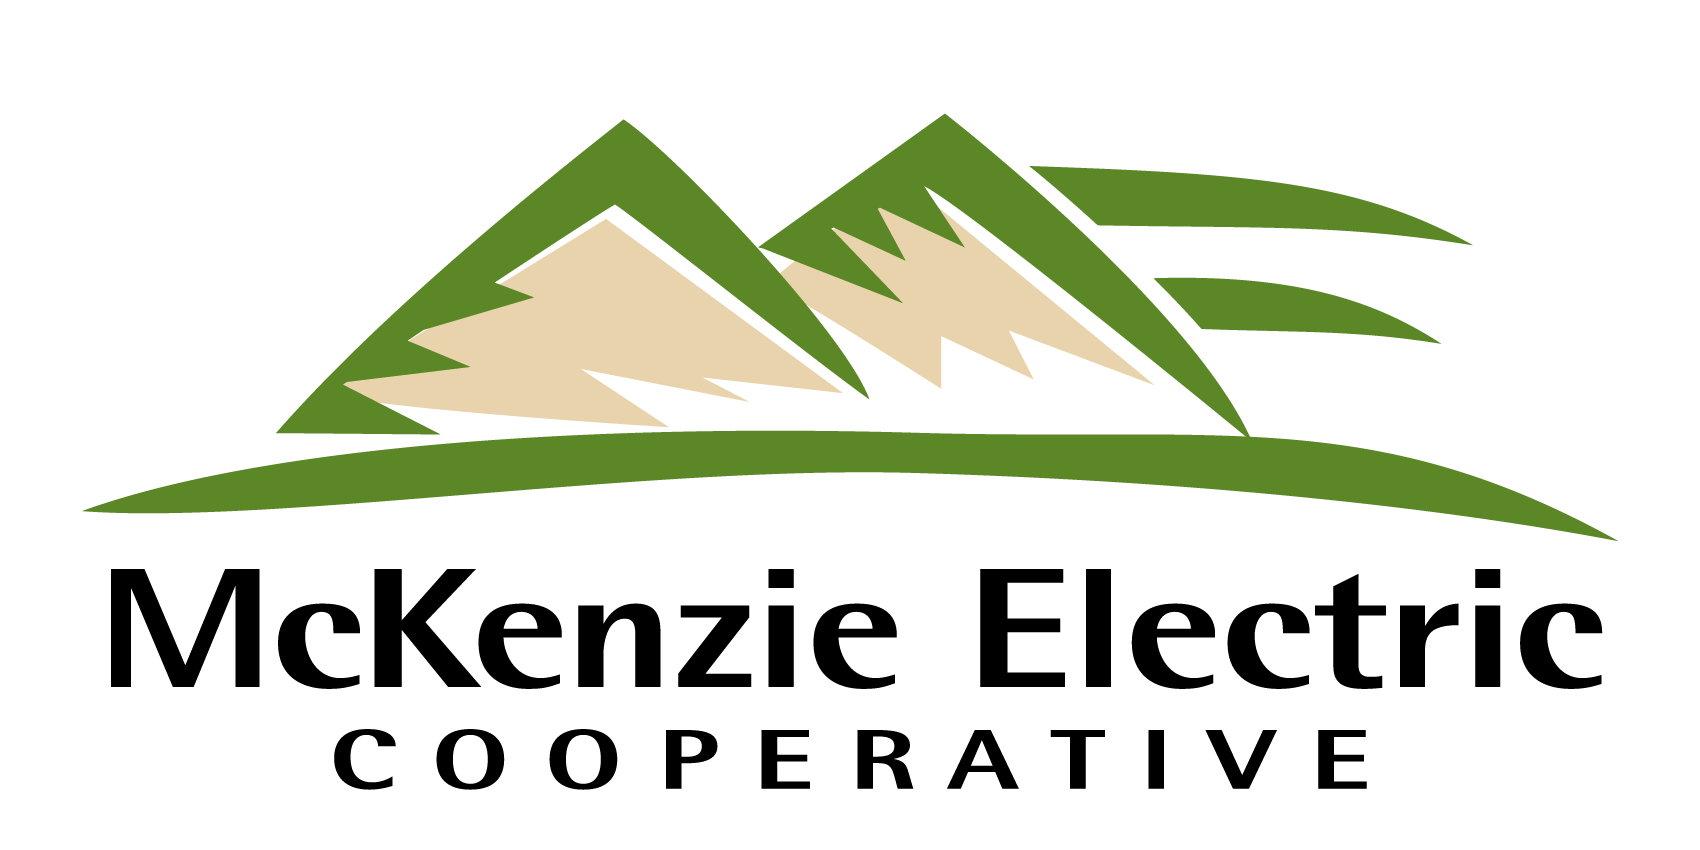 https://mckenzieelectric.com/sites/default/files/images/Logos/4color_padded.png